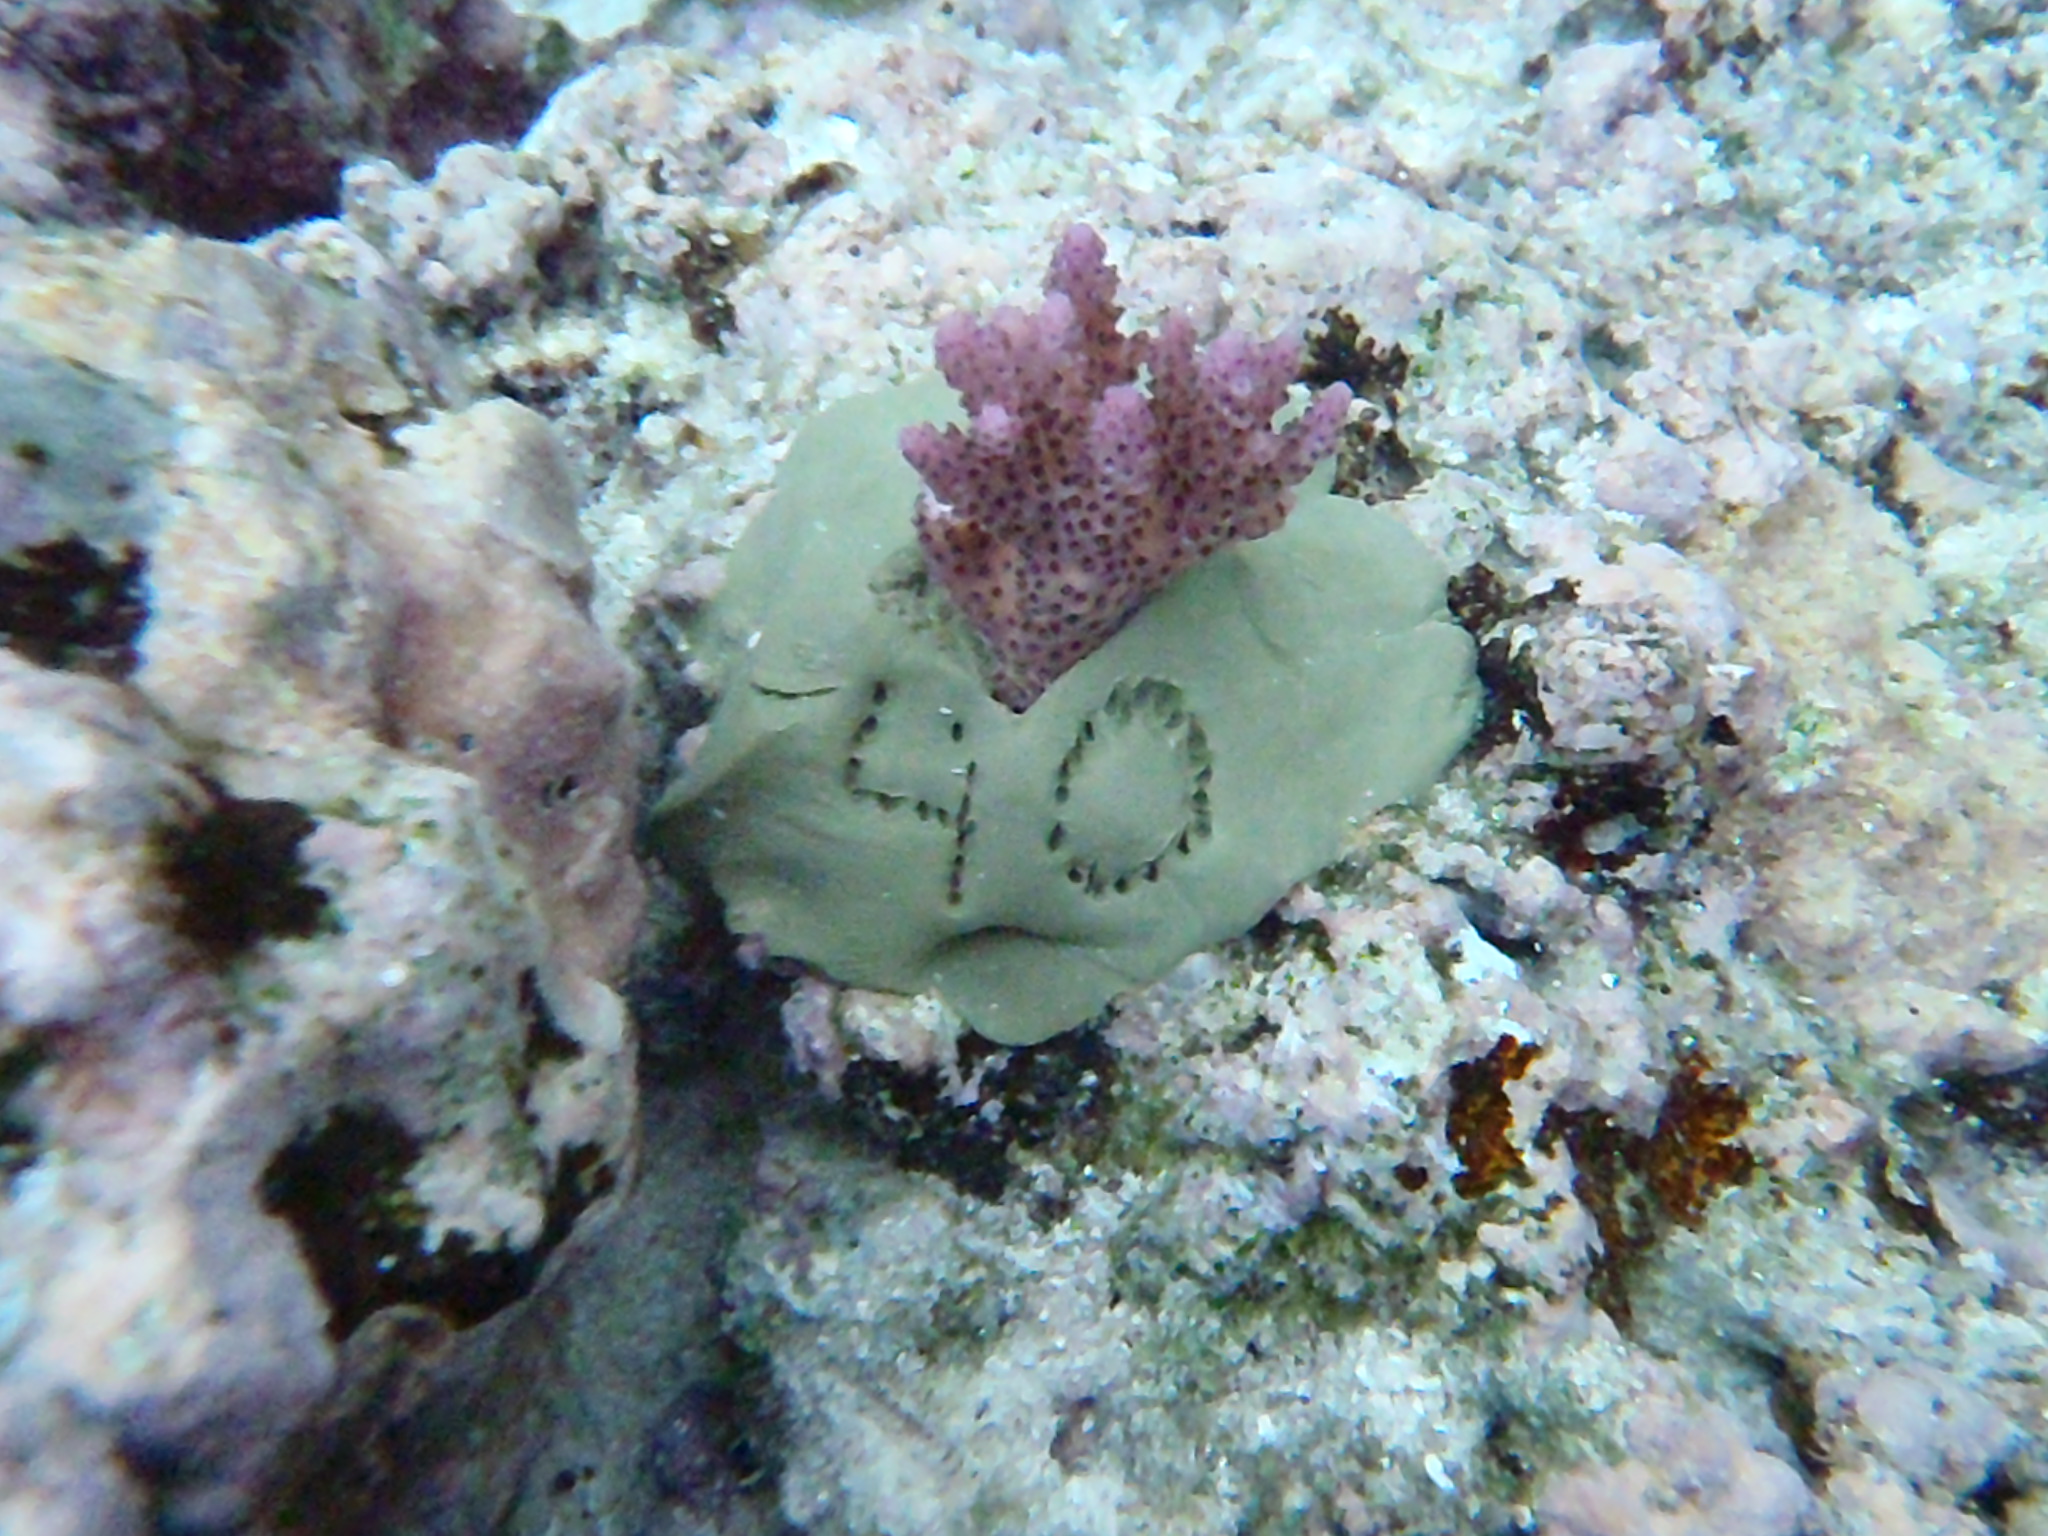 this is a photo of transplanted coral